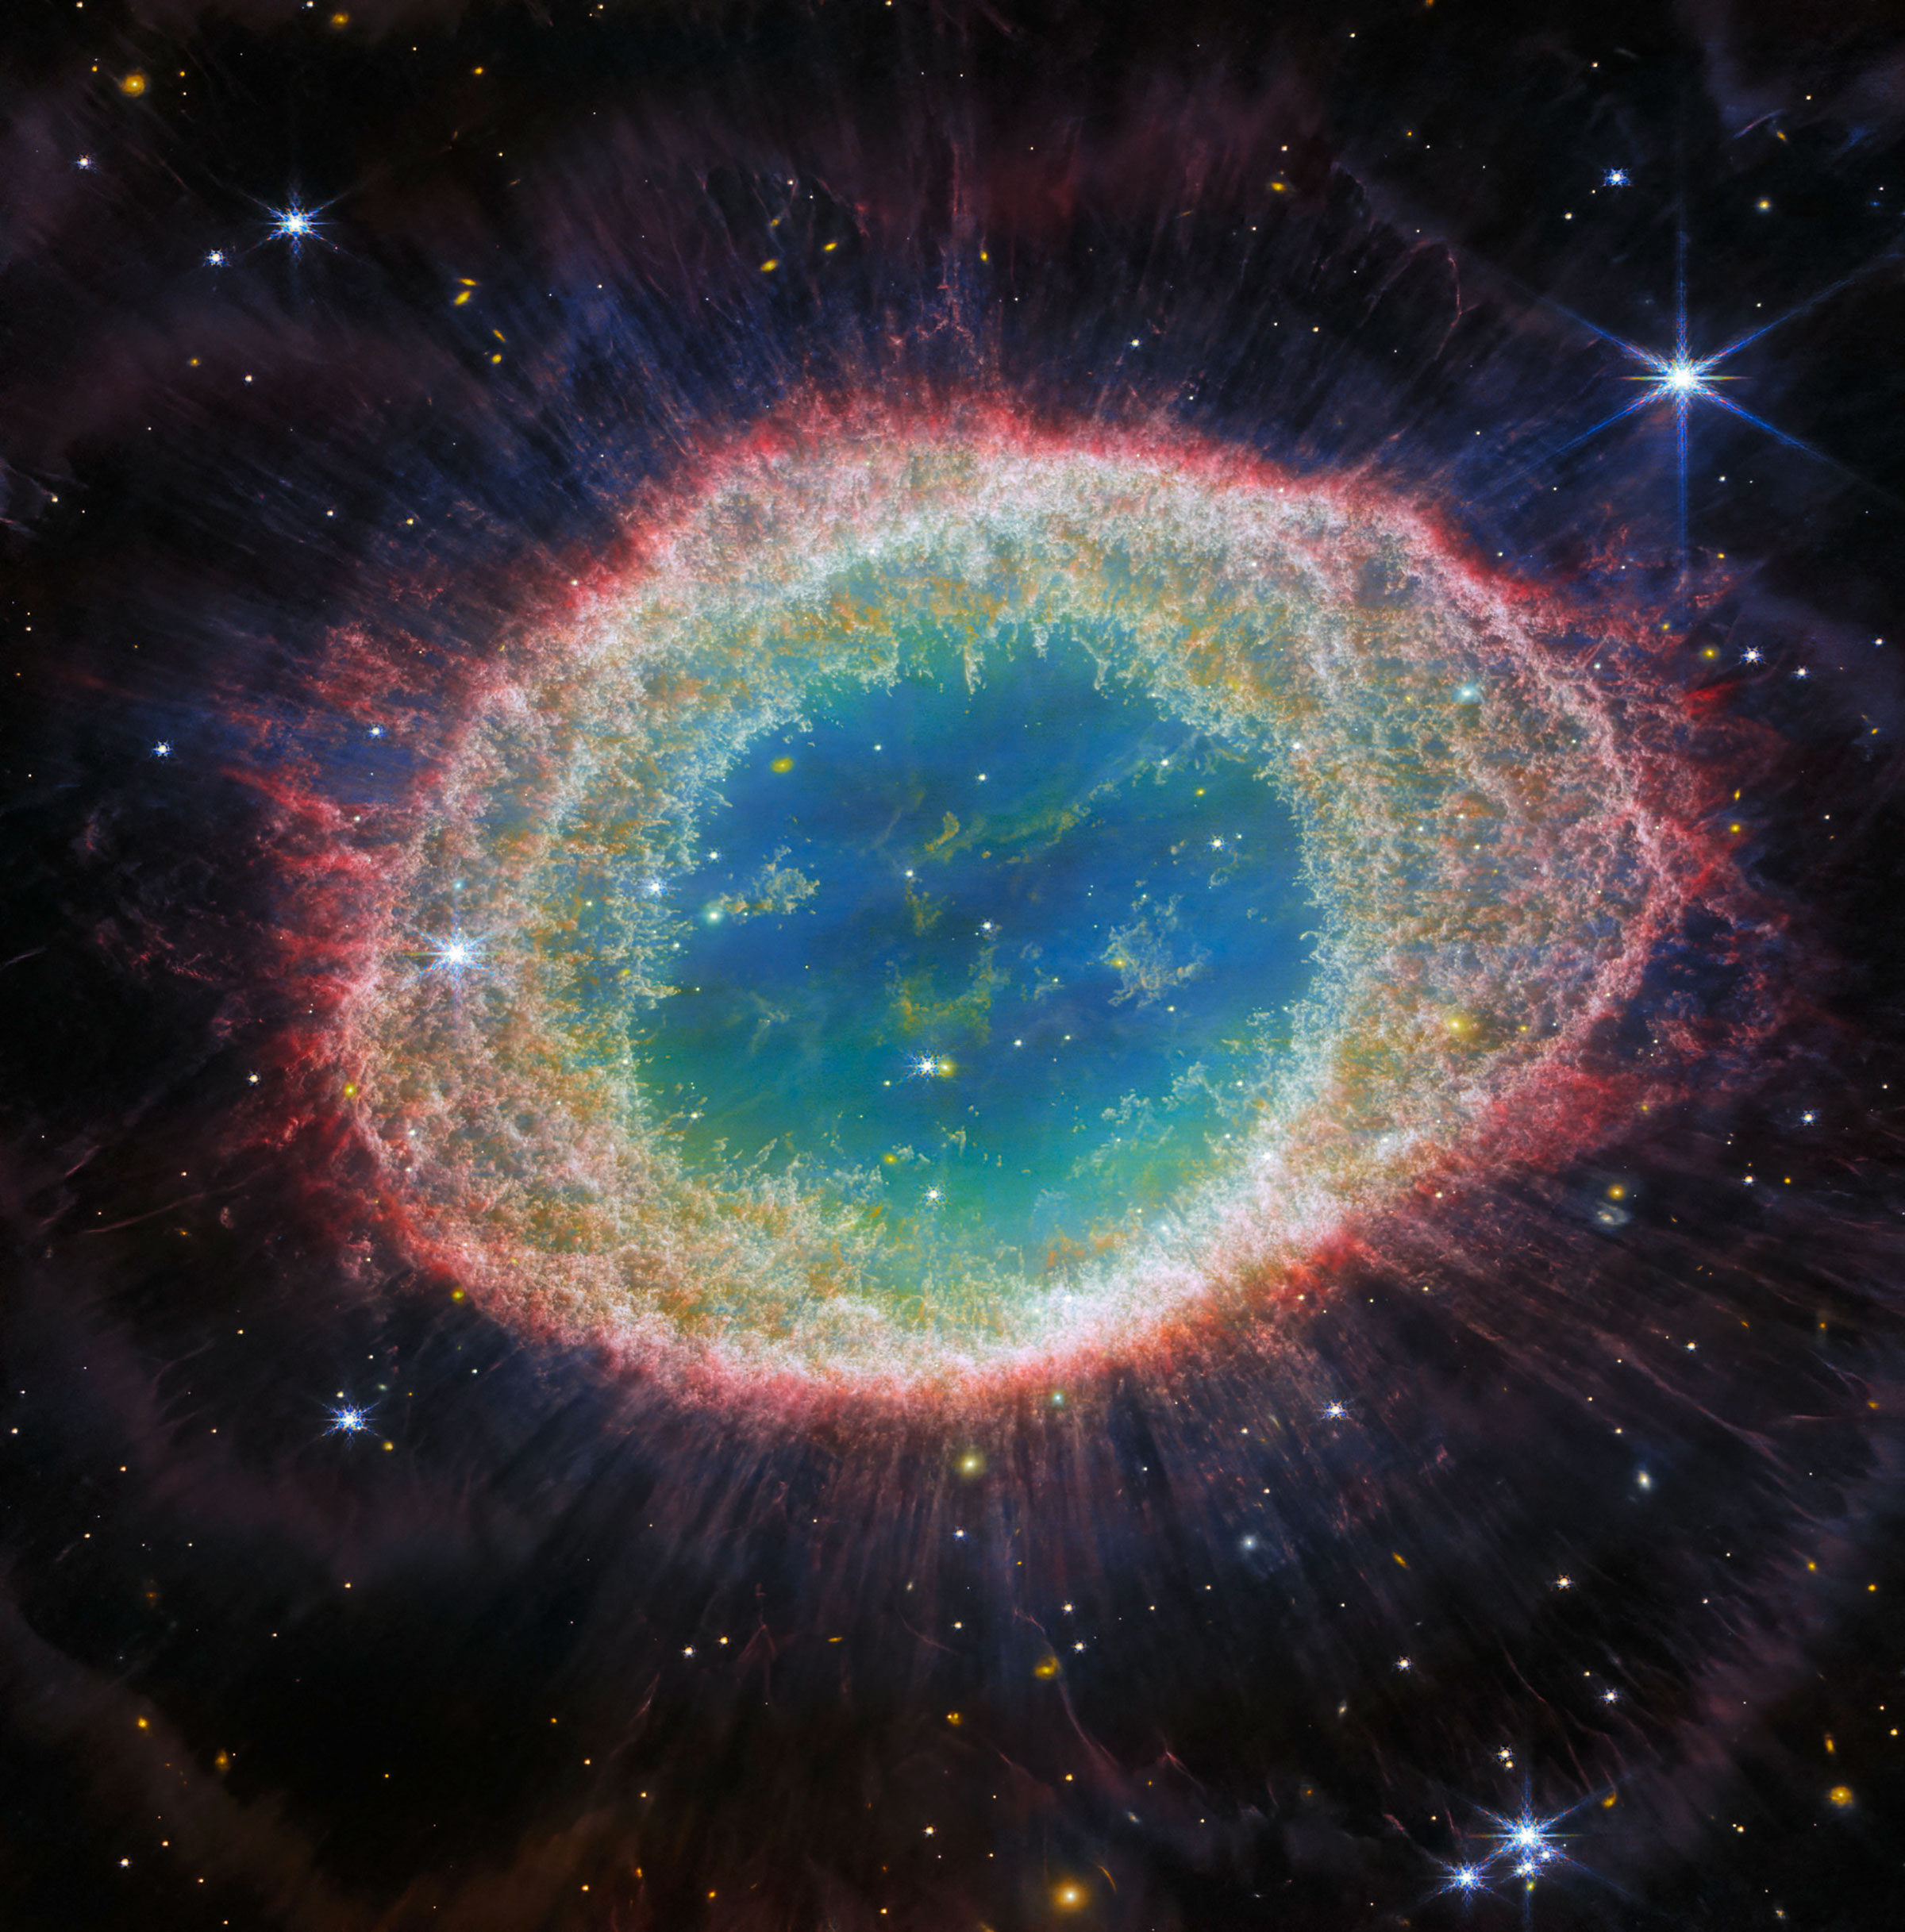 Webb’s near-infrared view of the Ring Nebula has a different color palette. This time, the nebula’s inner cavity hosts shades of blue and green, while the detailed ring transitions through shades of orange in the inner regions and pink in the outer region. Stars litter the scene, with a particularly prominent star with 8 long spikes in the top right corner.